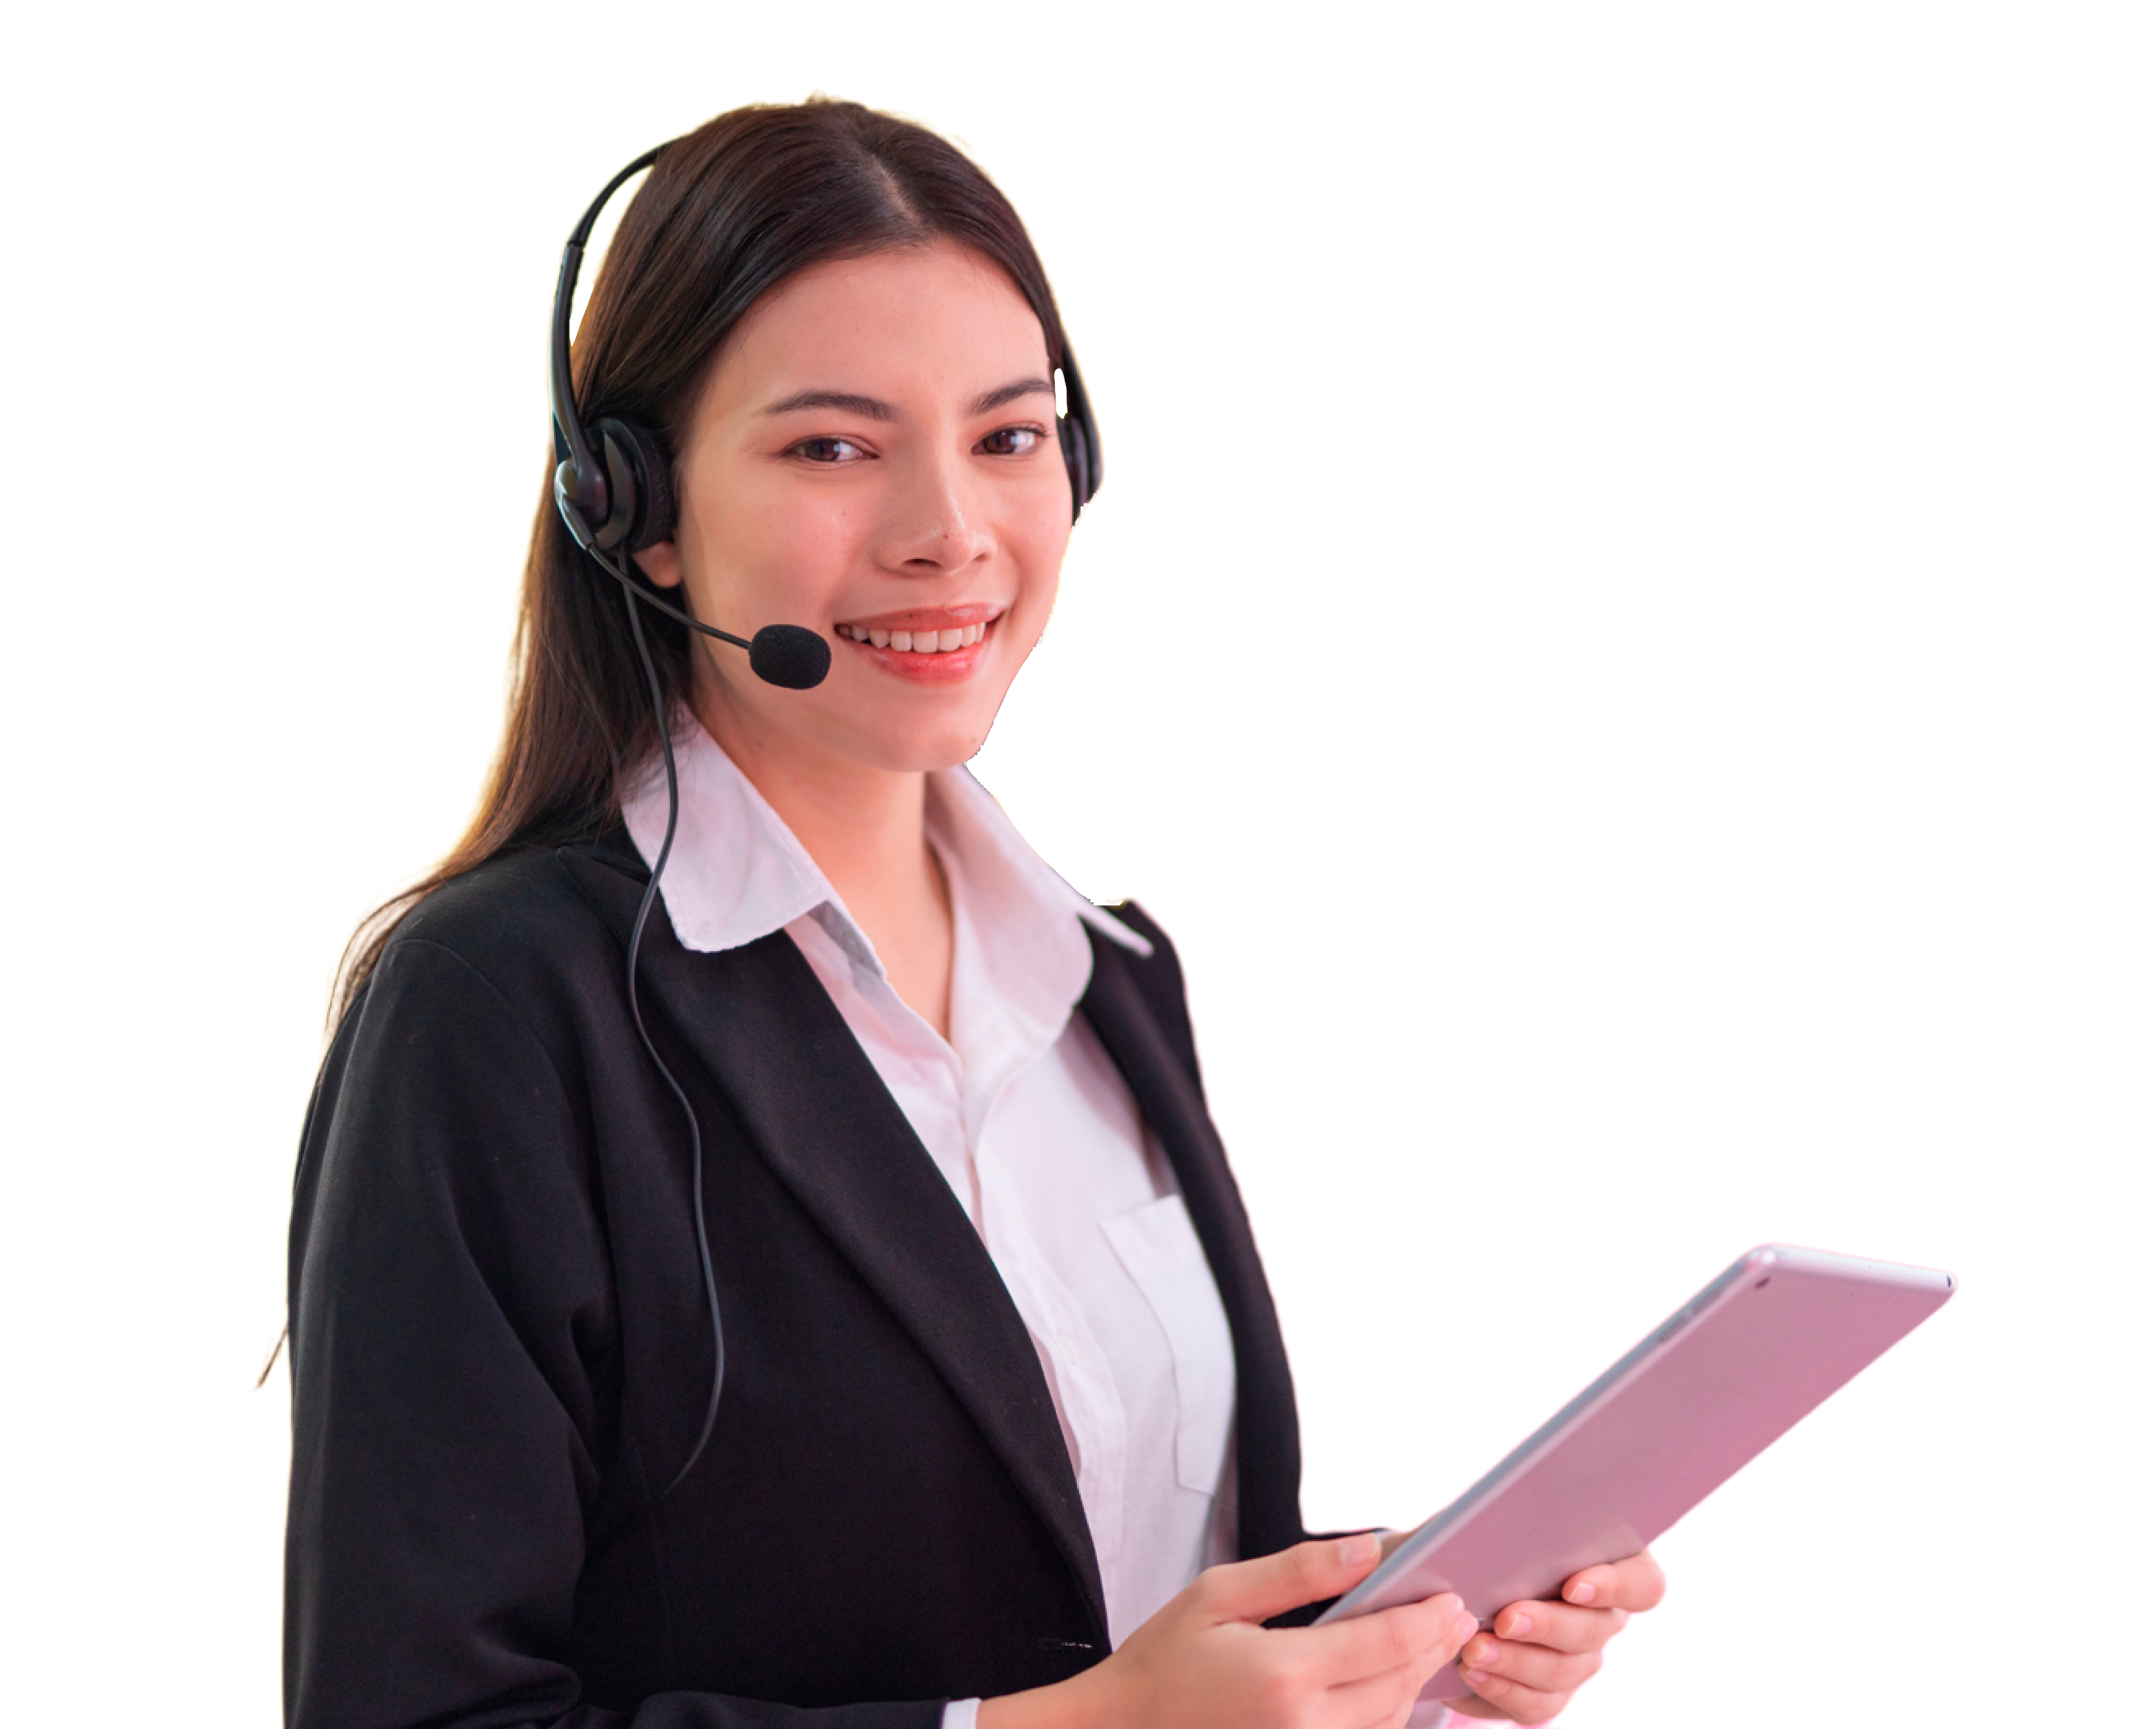 Woman agent on headset